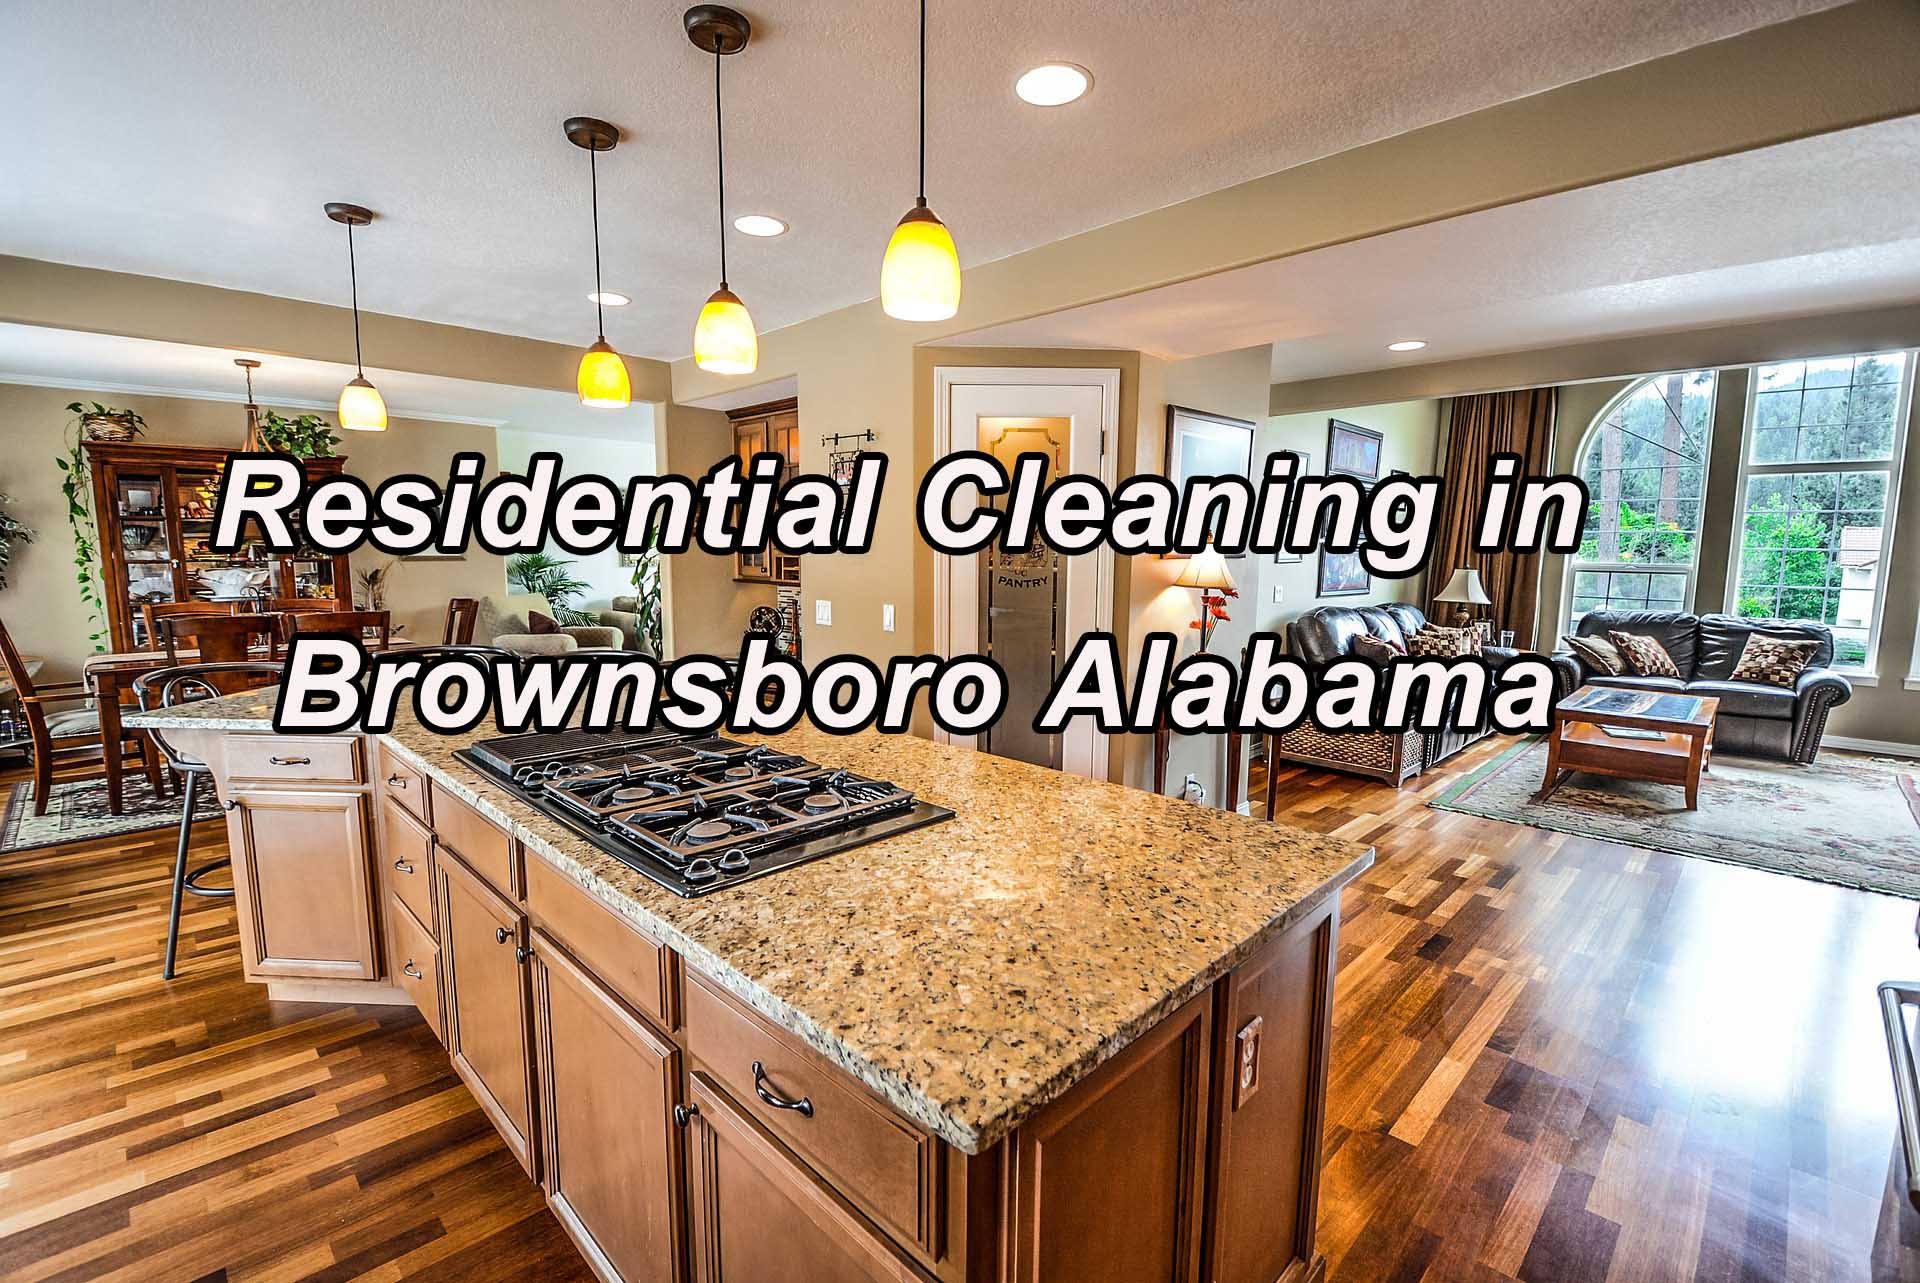 Residential Cleaning in Brownsboro Alabama